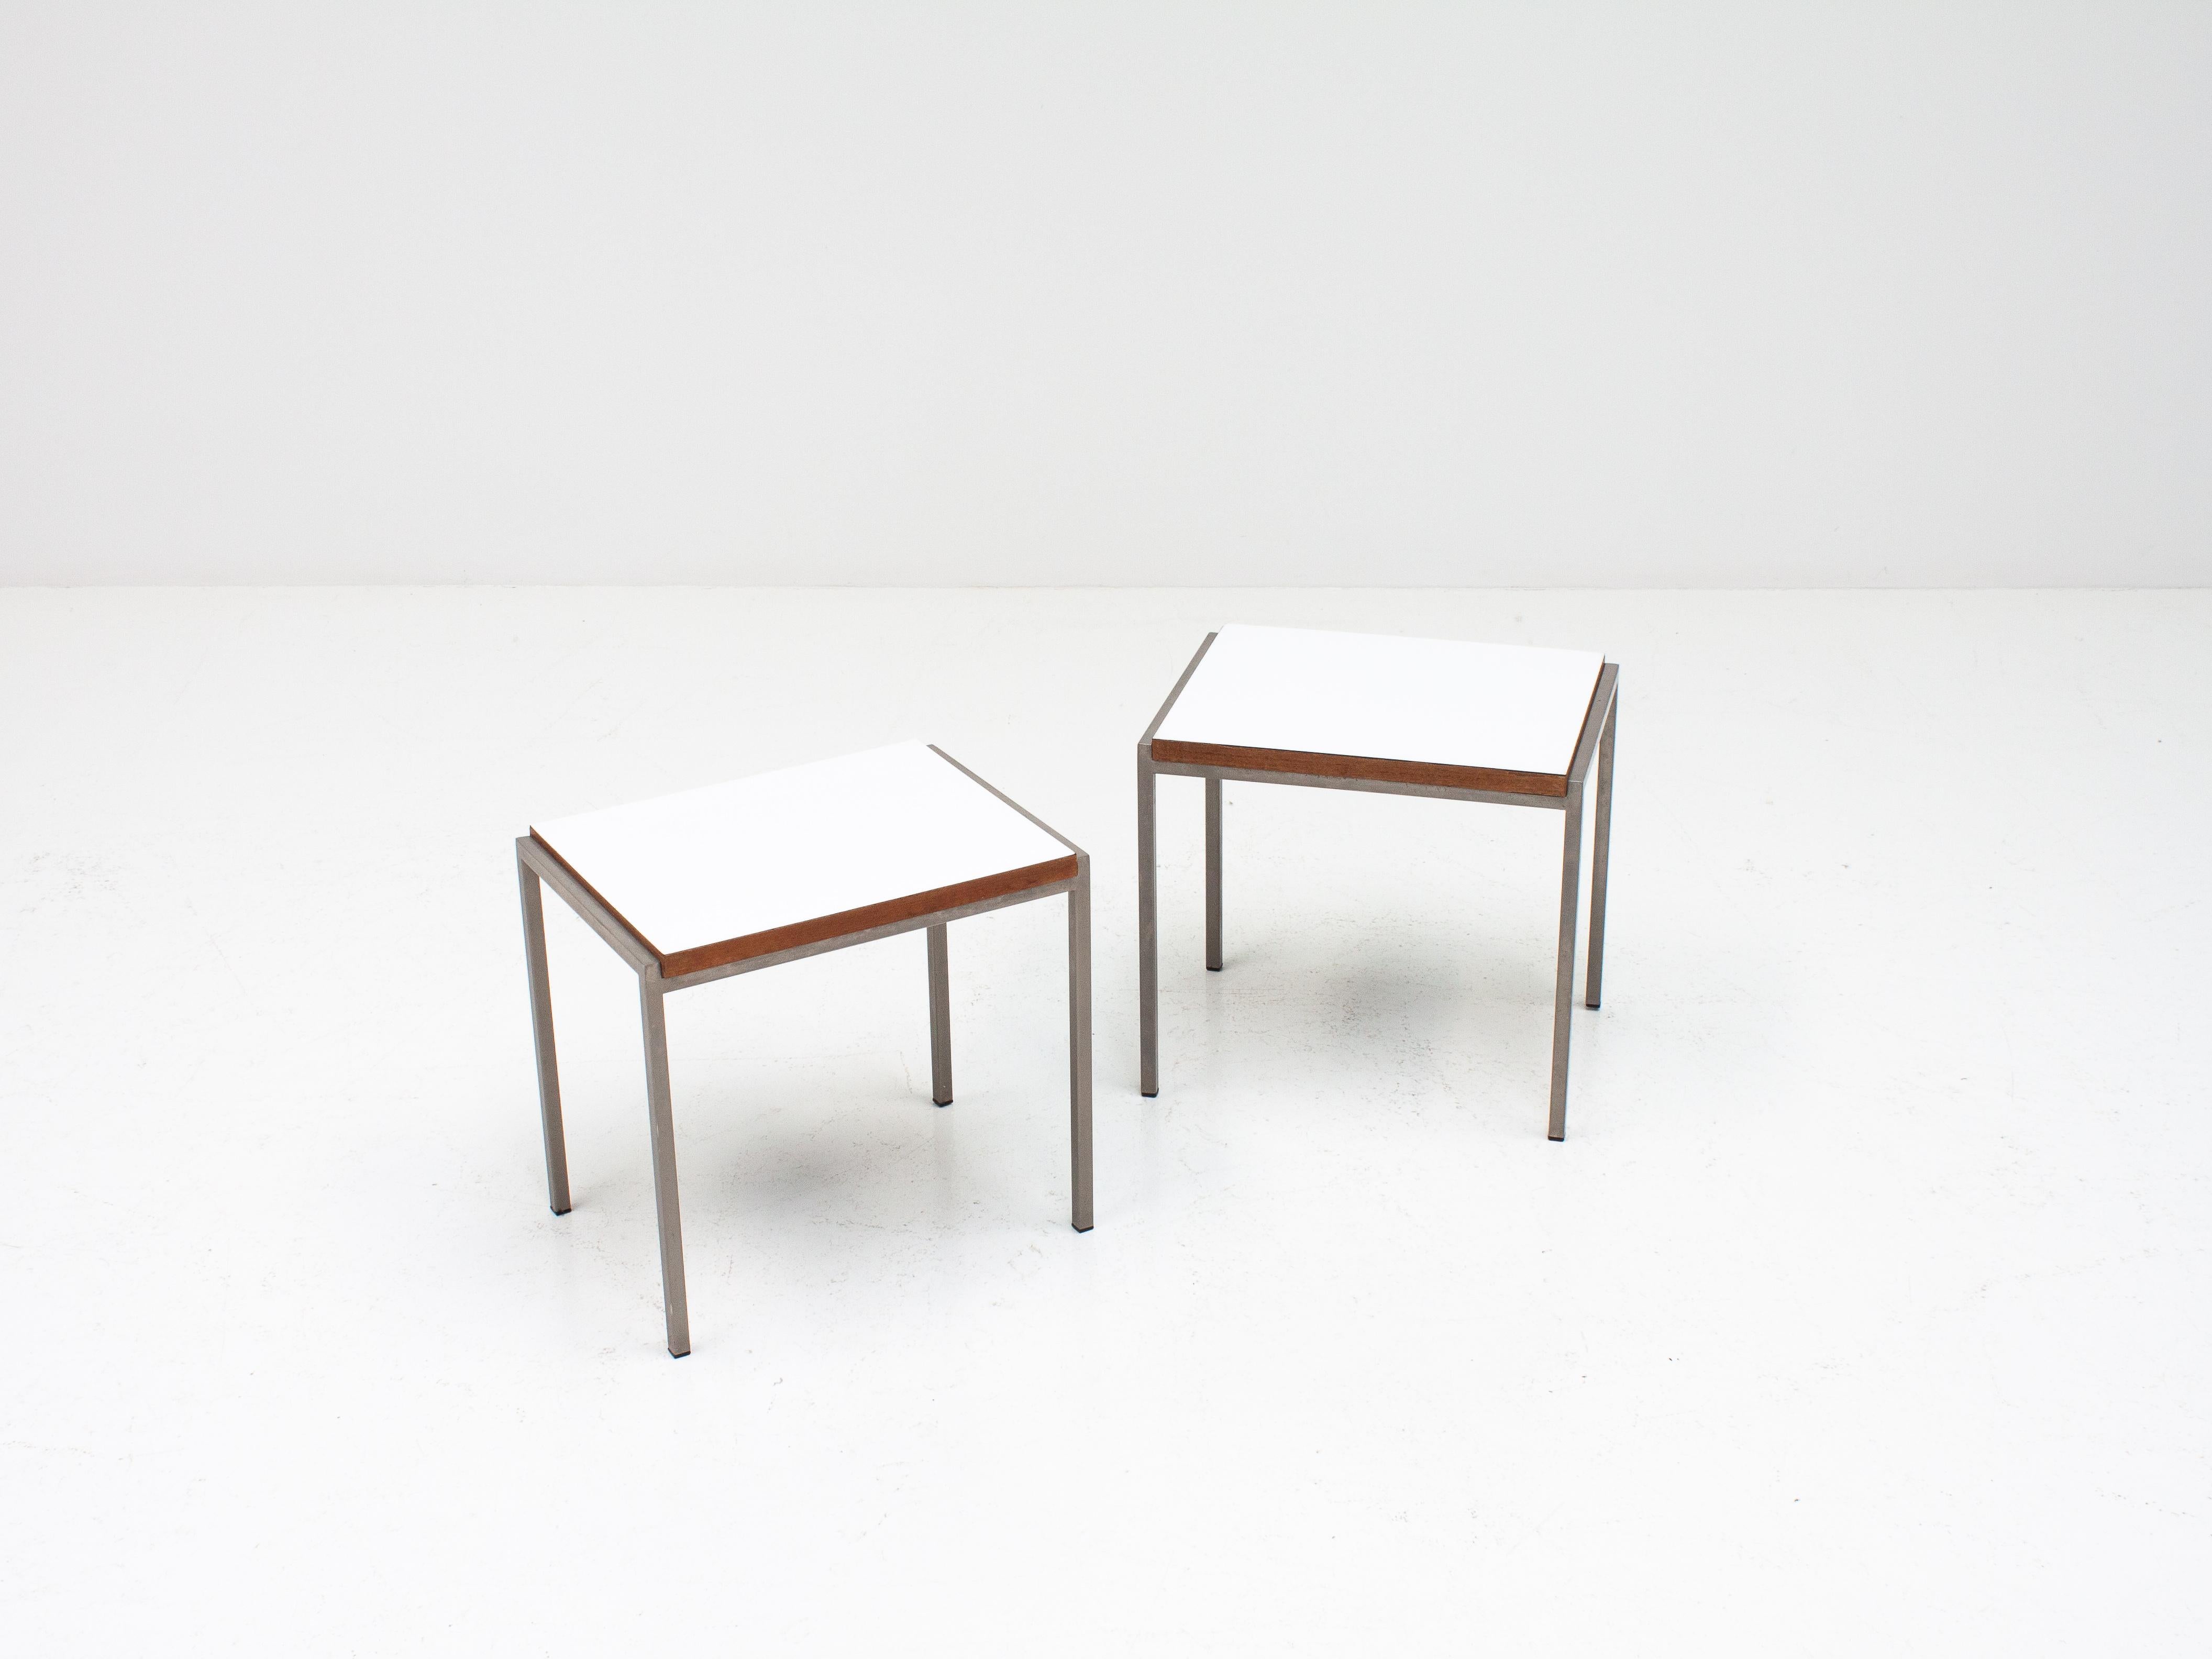 A fine pair of white laminate and teak veneered side tables with metal frames designed by Cees Braakman for UMS Pastoe in the 1960s, Netherlands

In good condition for age, you should expect light scratches to the laminate tabletops. There are